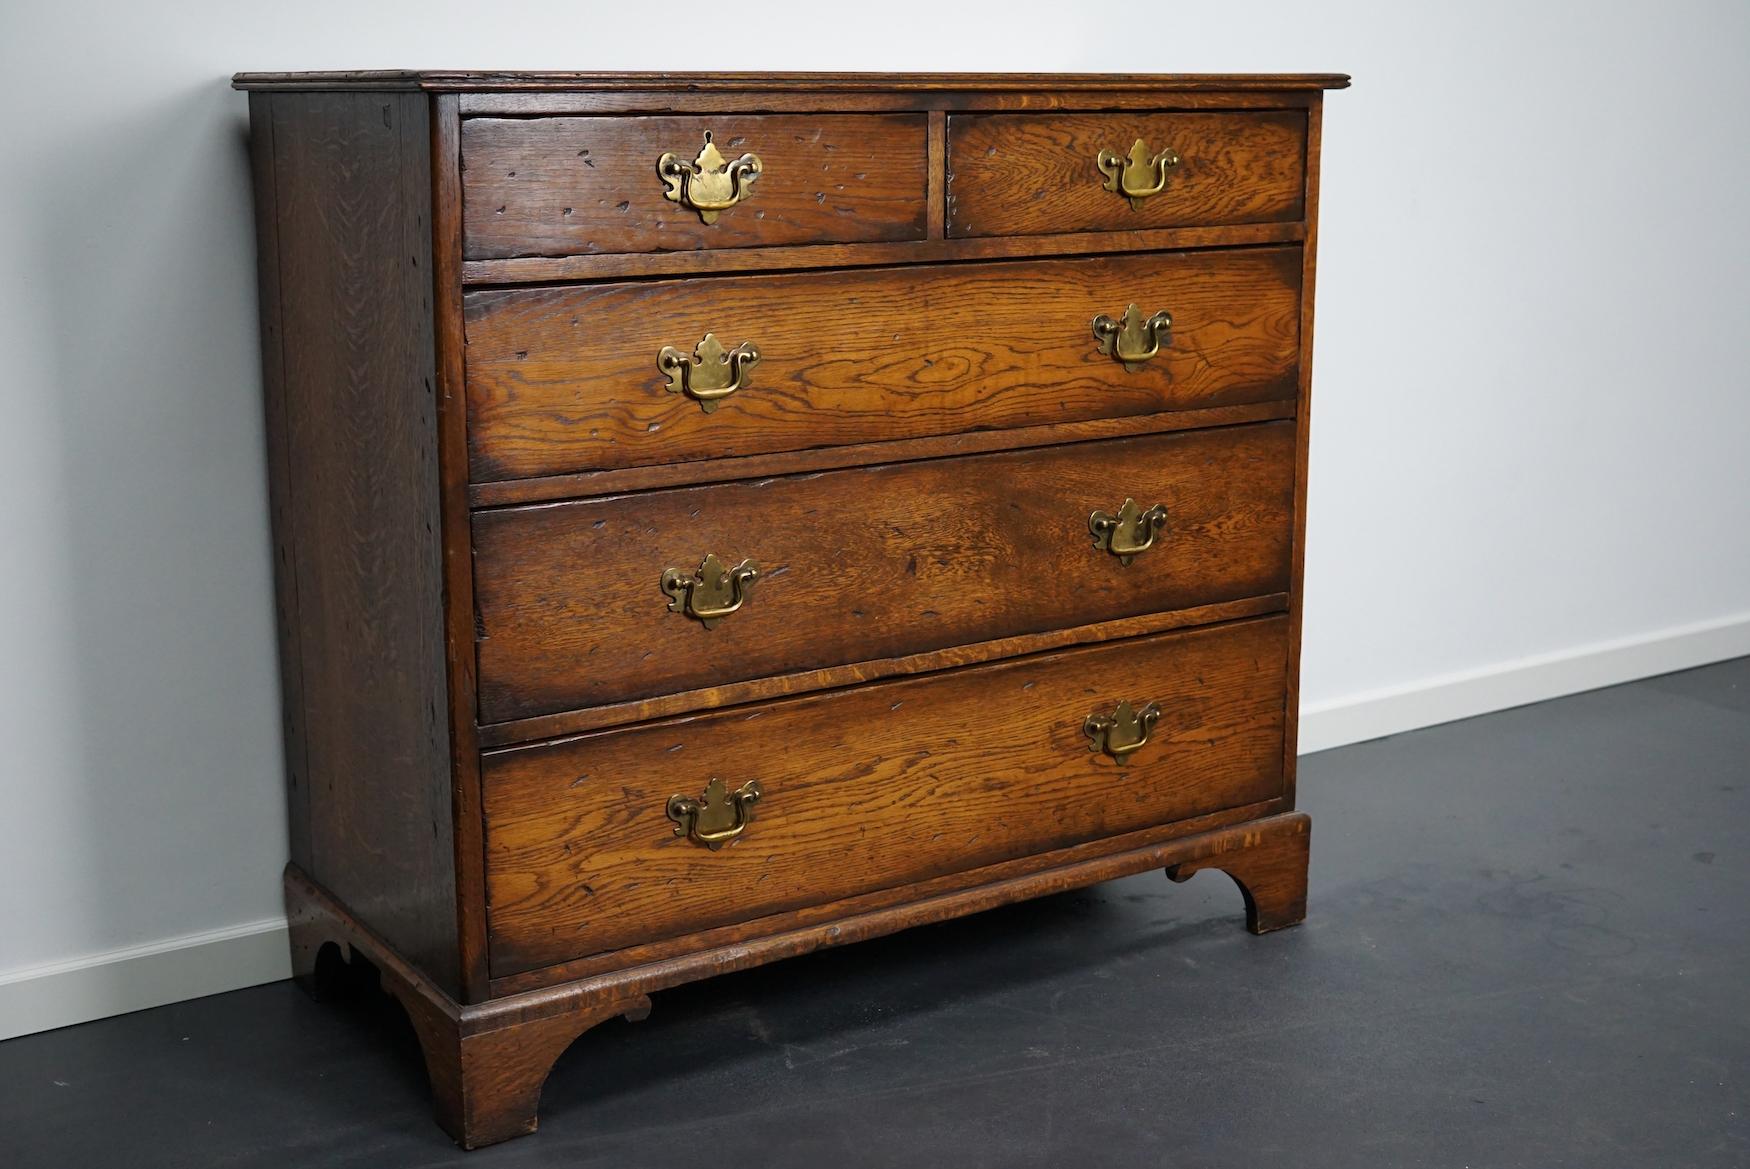 Very nice solid oak chest of drawers made circa early 20th century in England in Georgian style. It features 5 drawers with an original lock (no keys). It remains in a good condition with a nice patina and color. The interior dimensions of the